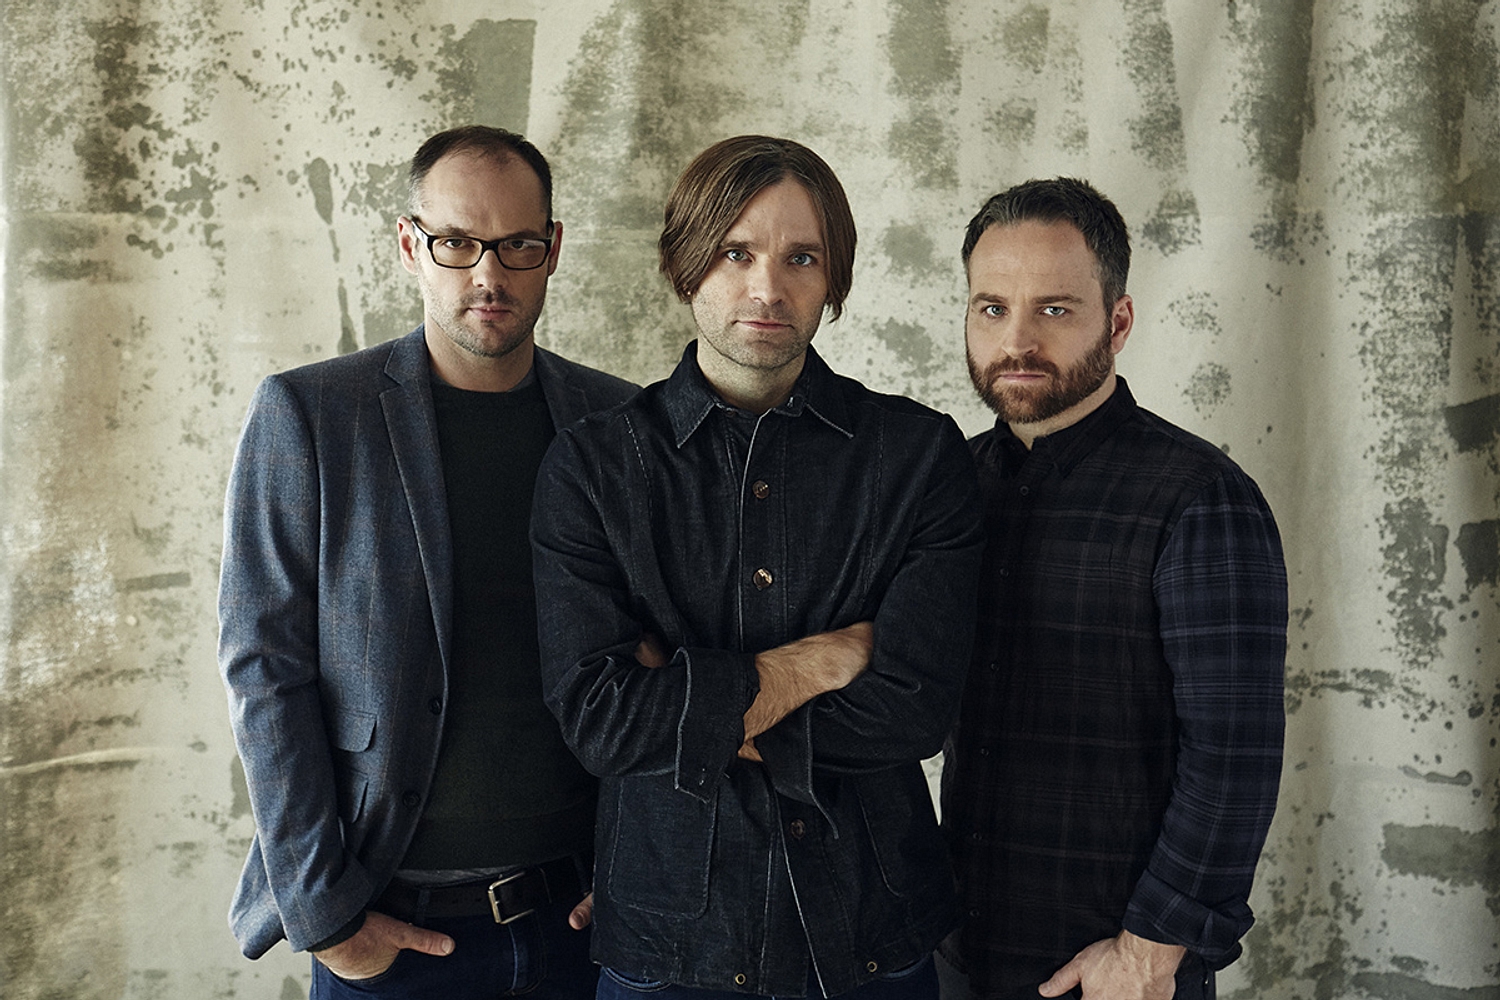 Death Cab For Cutie S Ben Gibbard On Chris Walla S Departure “we Knew This Was Coming For Some